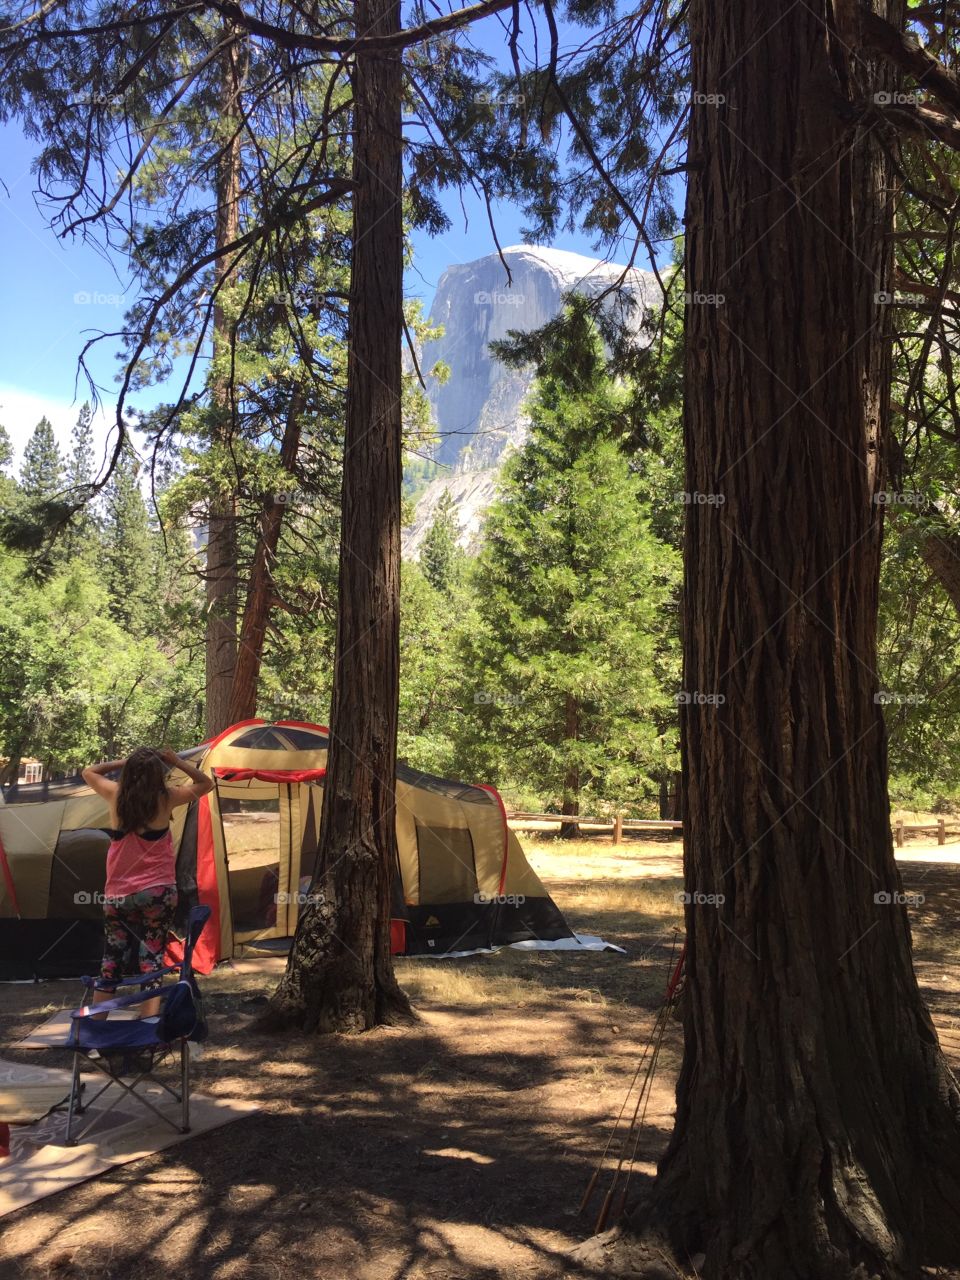 Camping Yosemite Valley . Camping in Yosemite valley with Half Dome in the background
